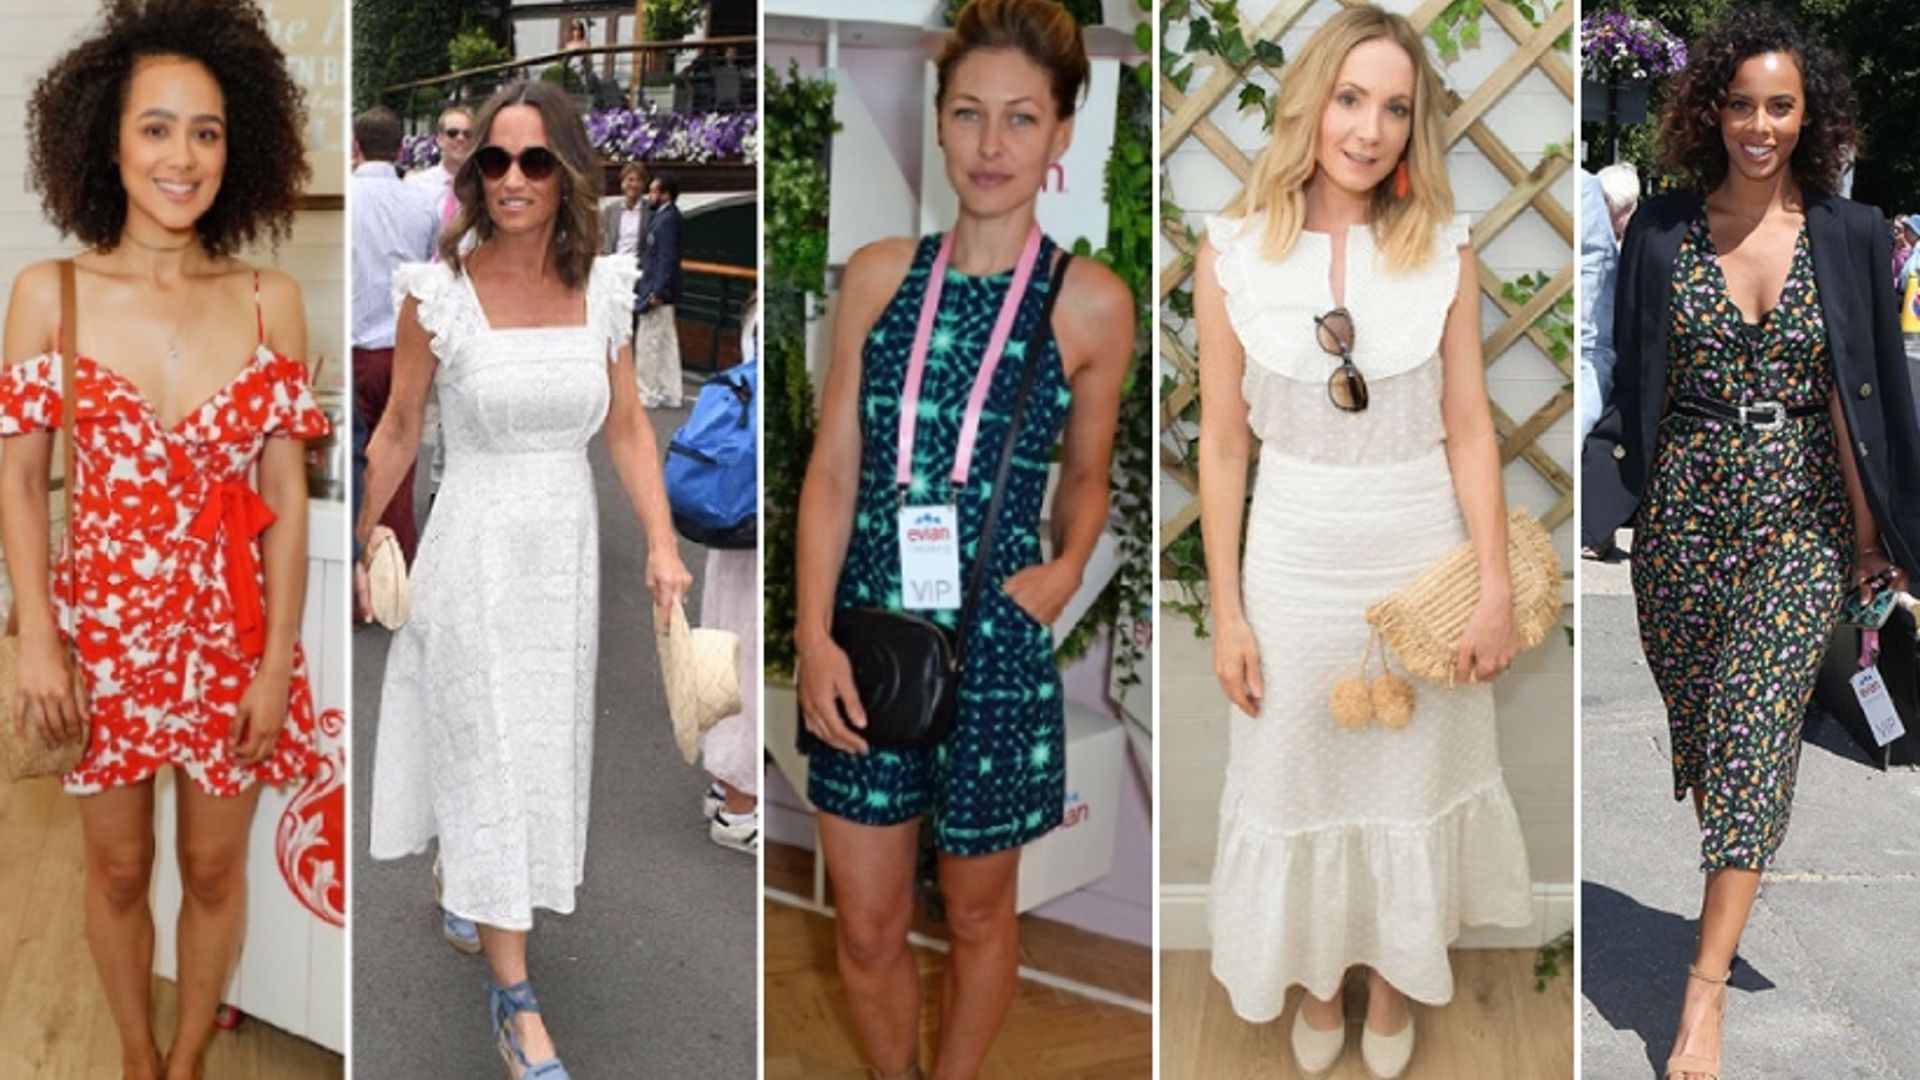 Wimbledon 2018: What the celebrities are wearing on centre court